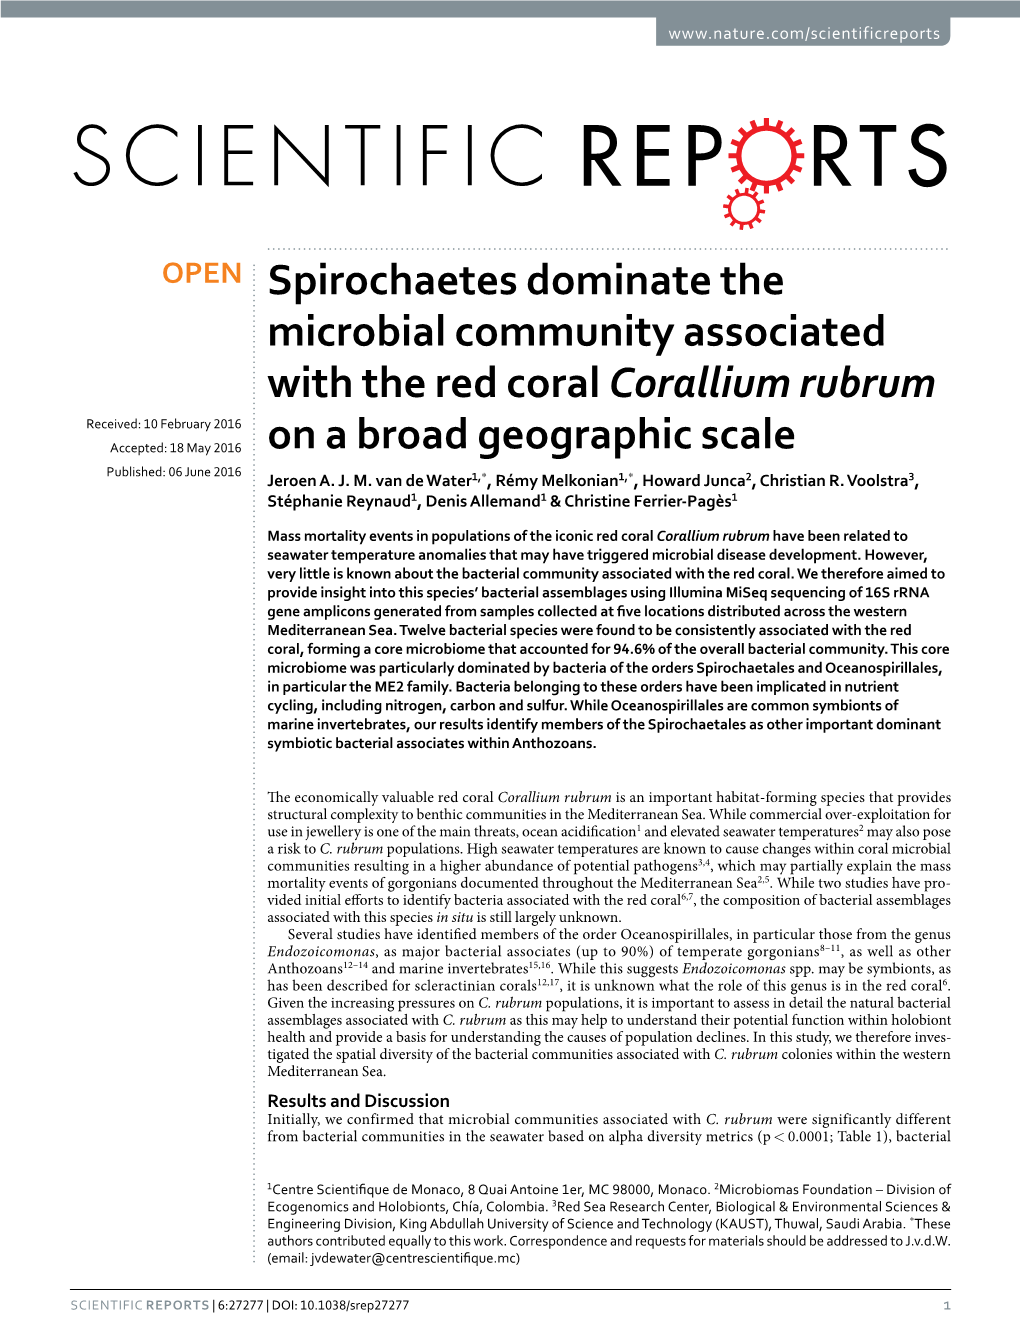 Spirochaetes Dominate the Microbial Community Associated with the Red